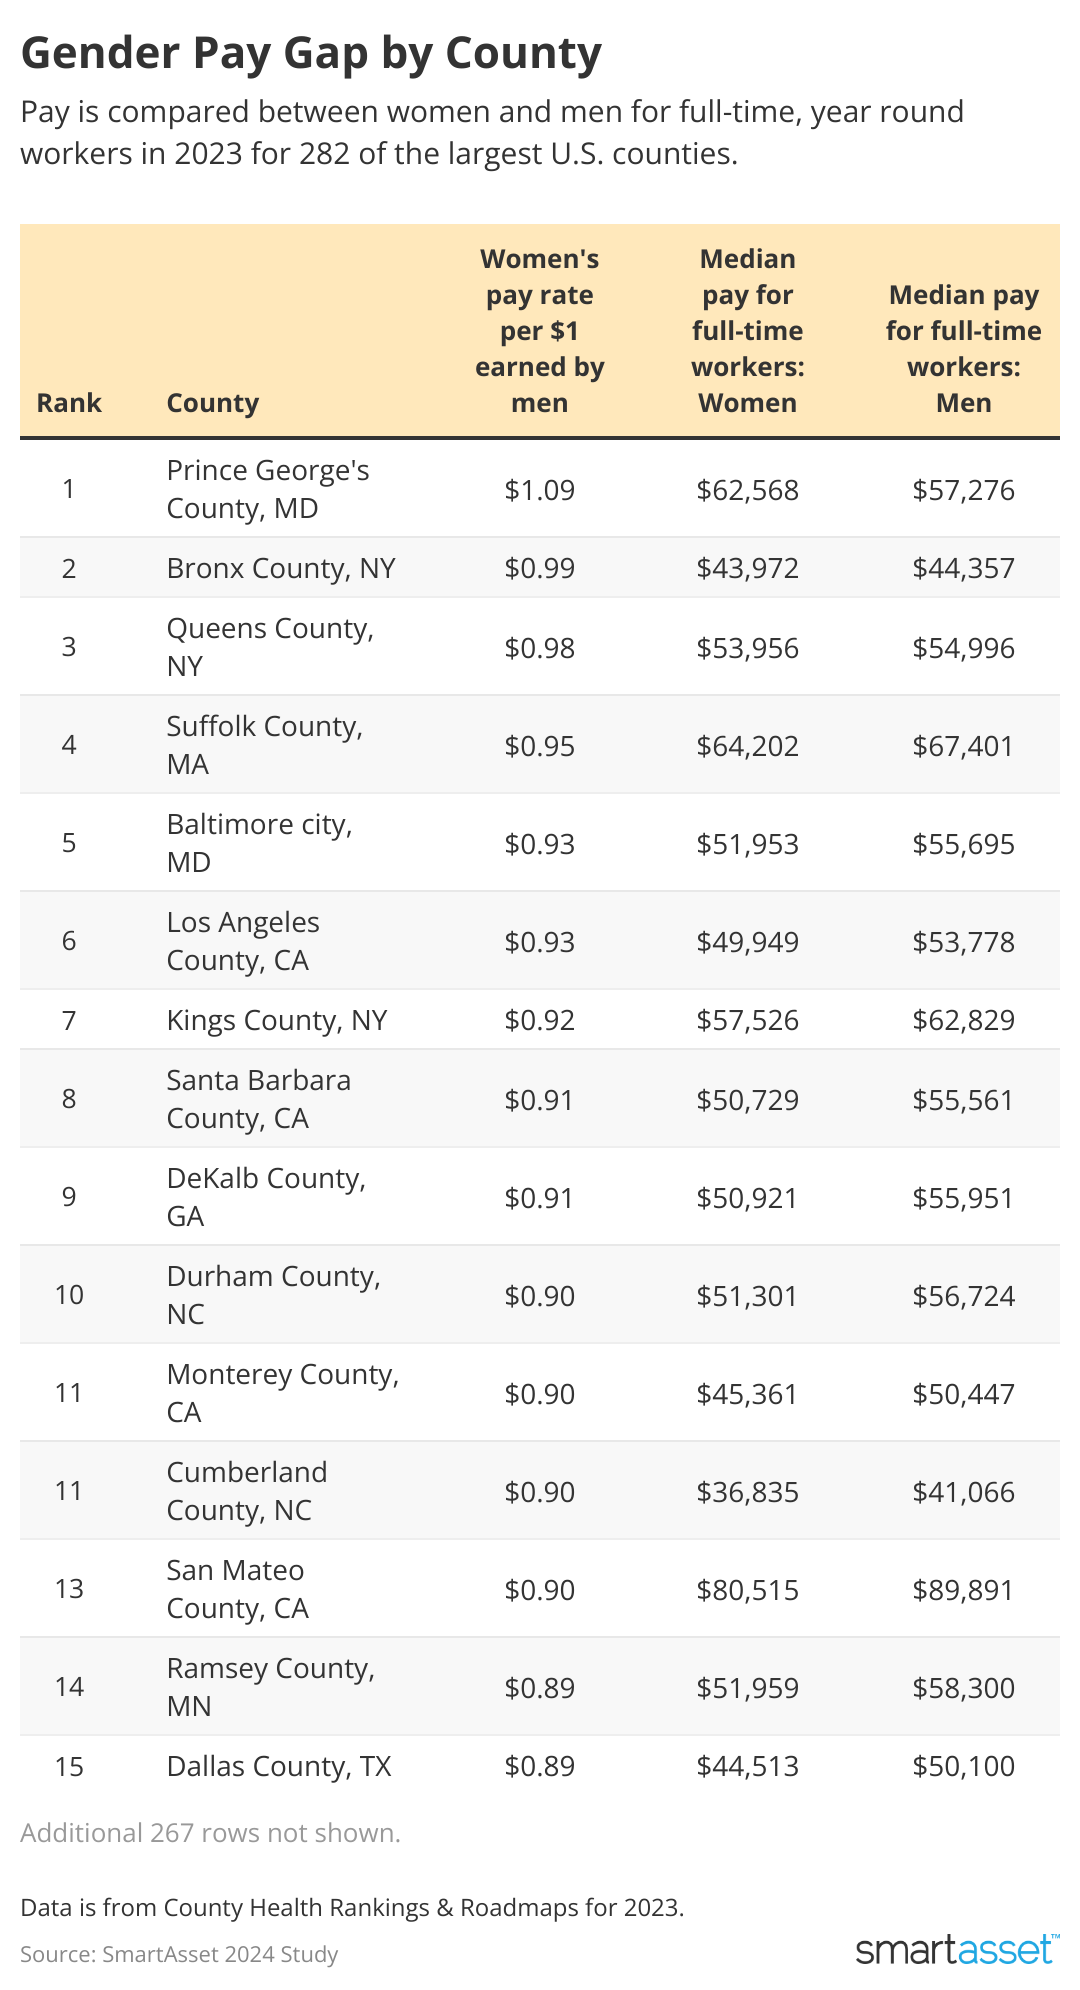 Table showing gender pay gap by county.